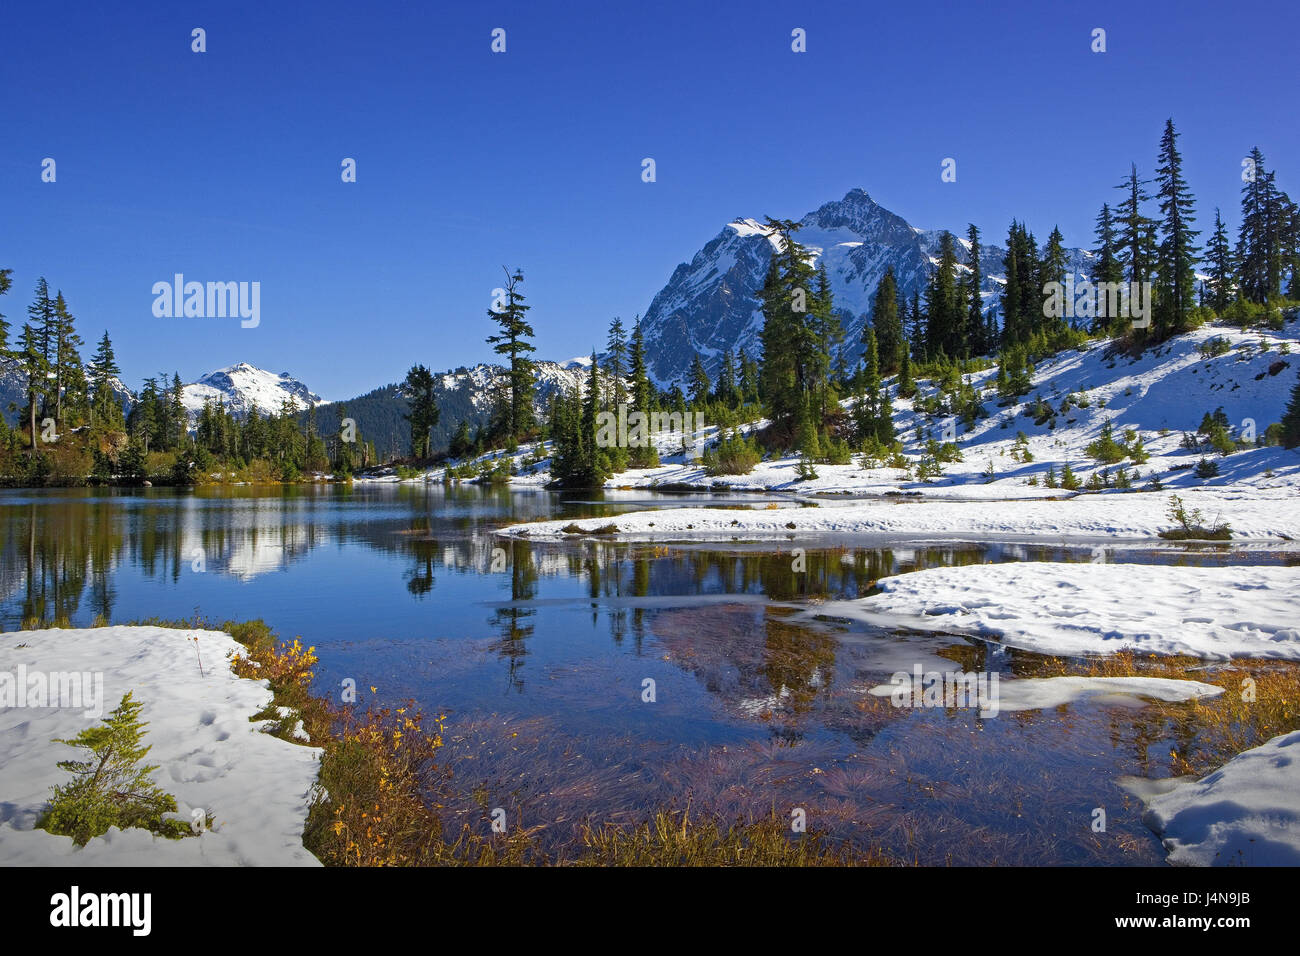 The USA, Heather Meadows, Picture brine, Mount Shuksan, snow, North America, destination, scenery, place of interest, nature, mirroring, water surface, snow leftovers, sunny, deserted, remotely, Idyll, lake, Stock Photo